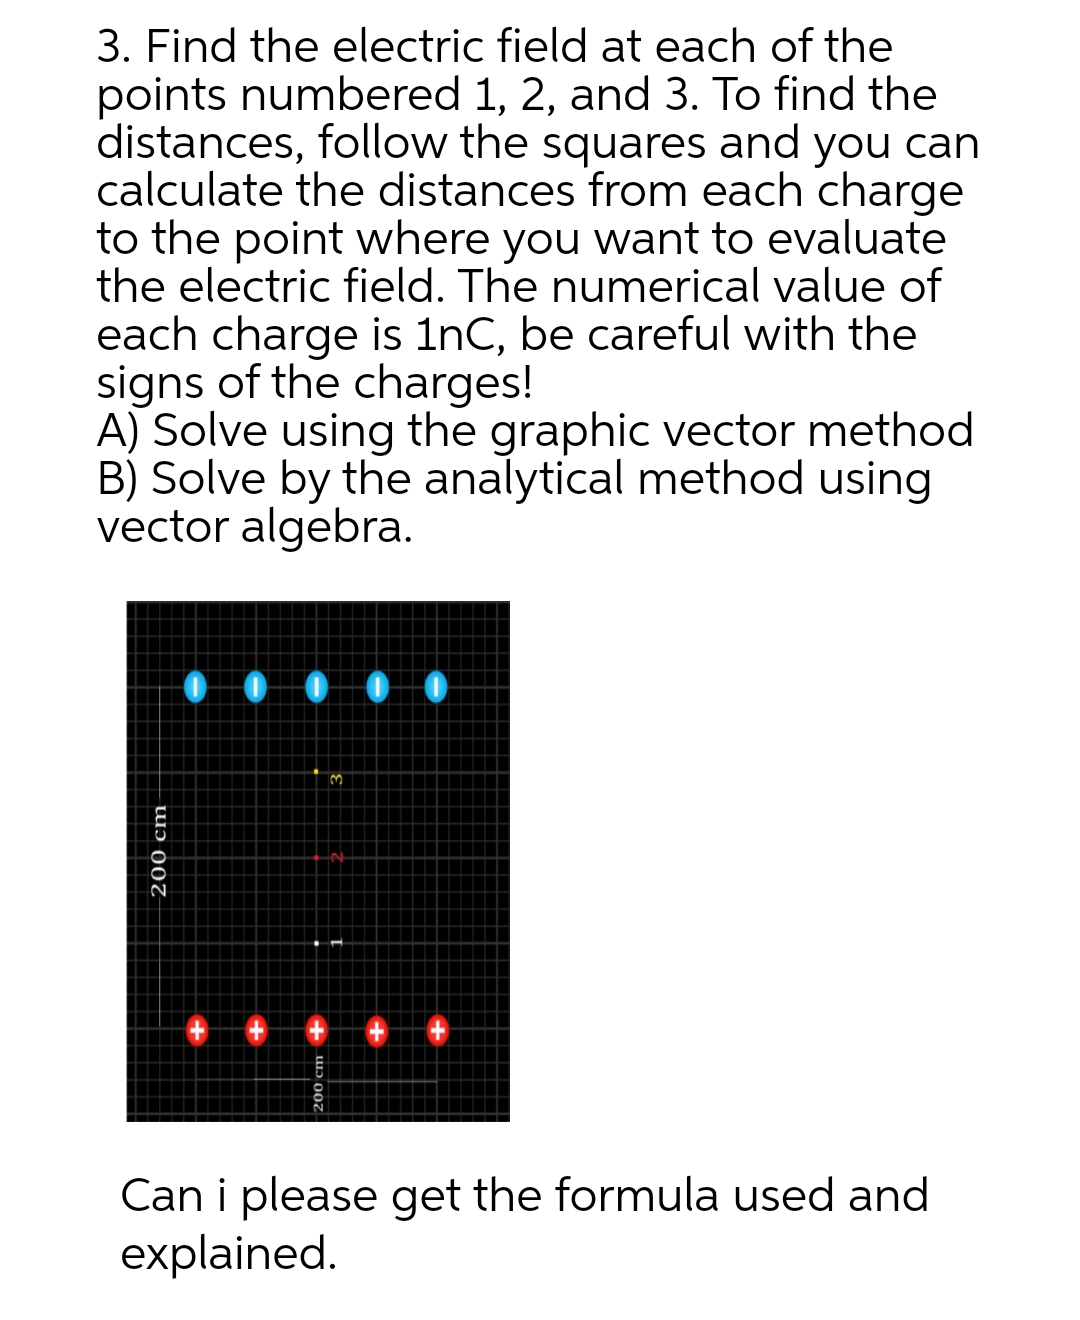 3. Find the electric field at each of the
points numbered 1, 2, and 3. To find the
distances, follow the squares and you can
calculate the distances from each charge
to the point where you want to evaluate
the electric field. The numerical value of
each charge is 1nC, be careful with the
signs of the charges!
A) Solve using the graphic vector method
B) Solve by the analytical method using
vector algebra.
200 cm
00000
3
Can i please get the formula used and
explained.